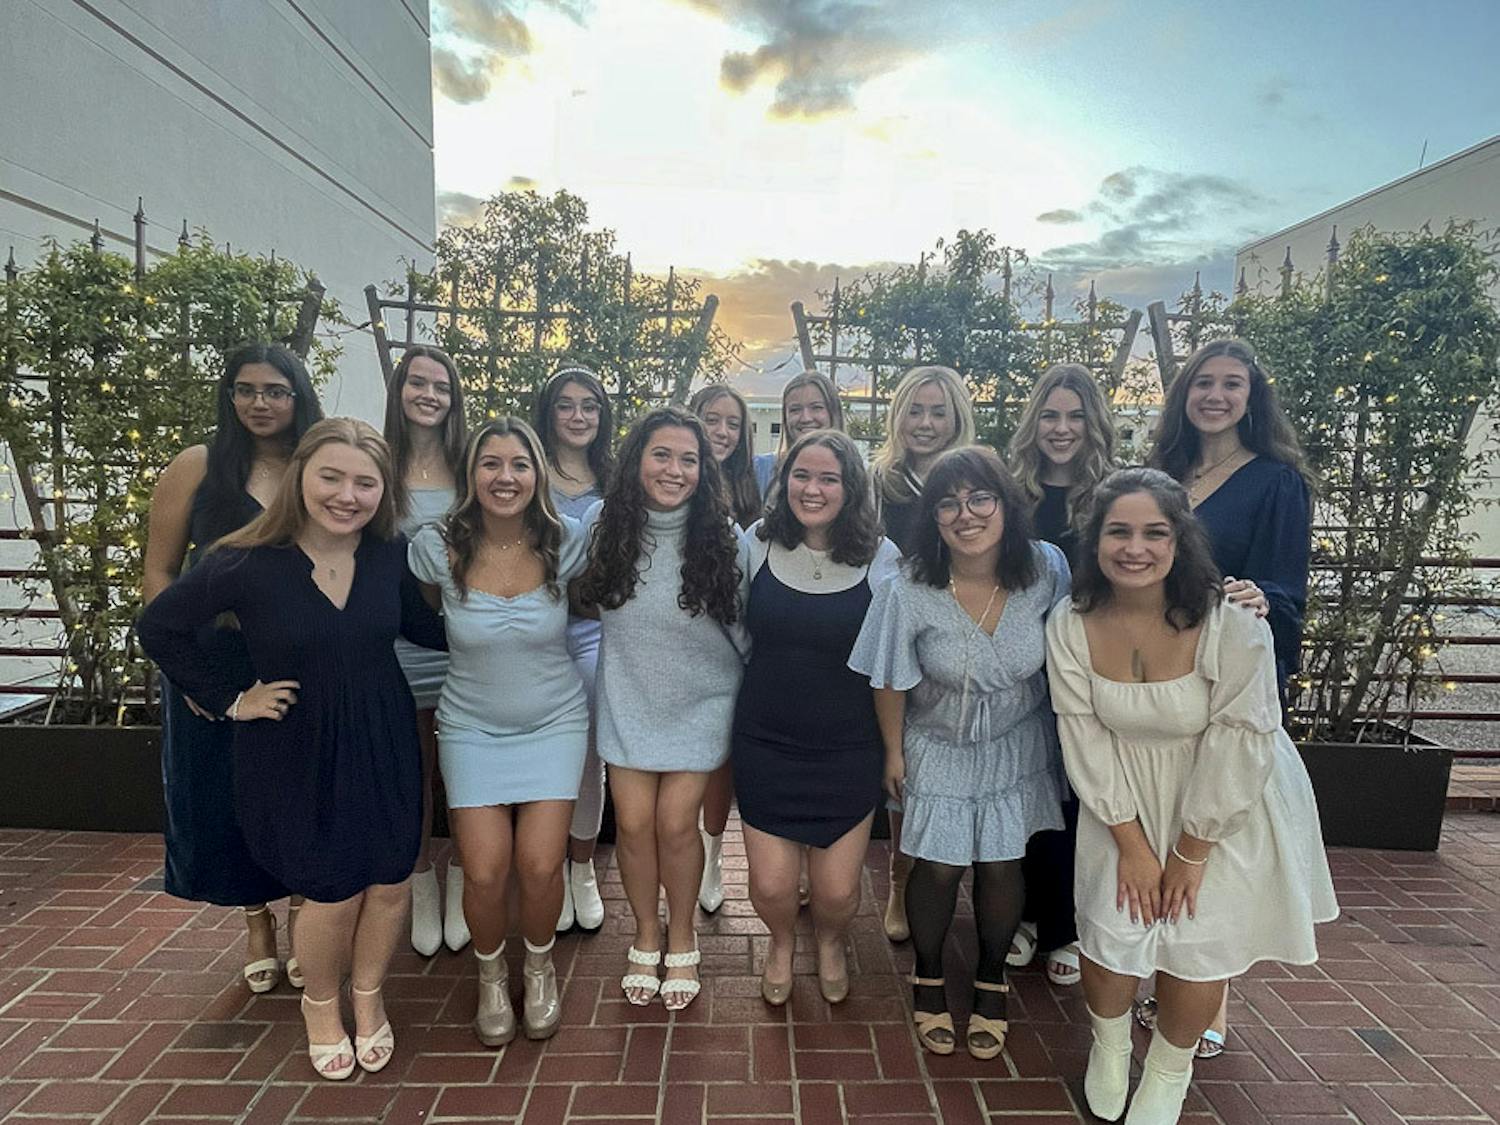 Members of The Cocktails pose outside of the Koger Center for the Arts after their winter recital on Dec. 2, 2022. The all-female a capella group is organized and ran by students who perform live events around Columbia and release their content online.